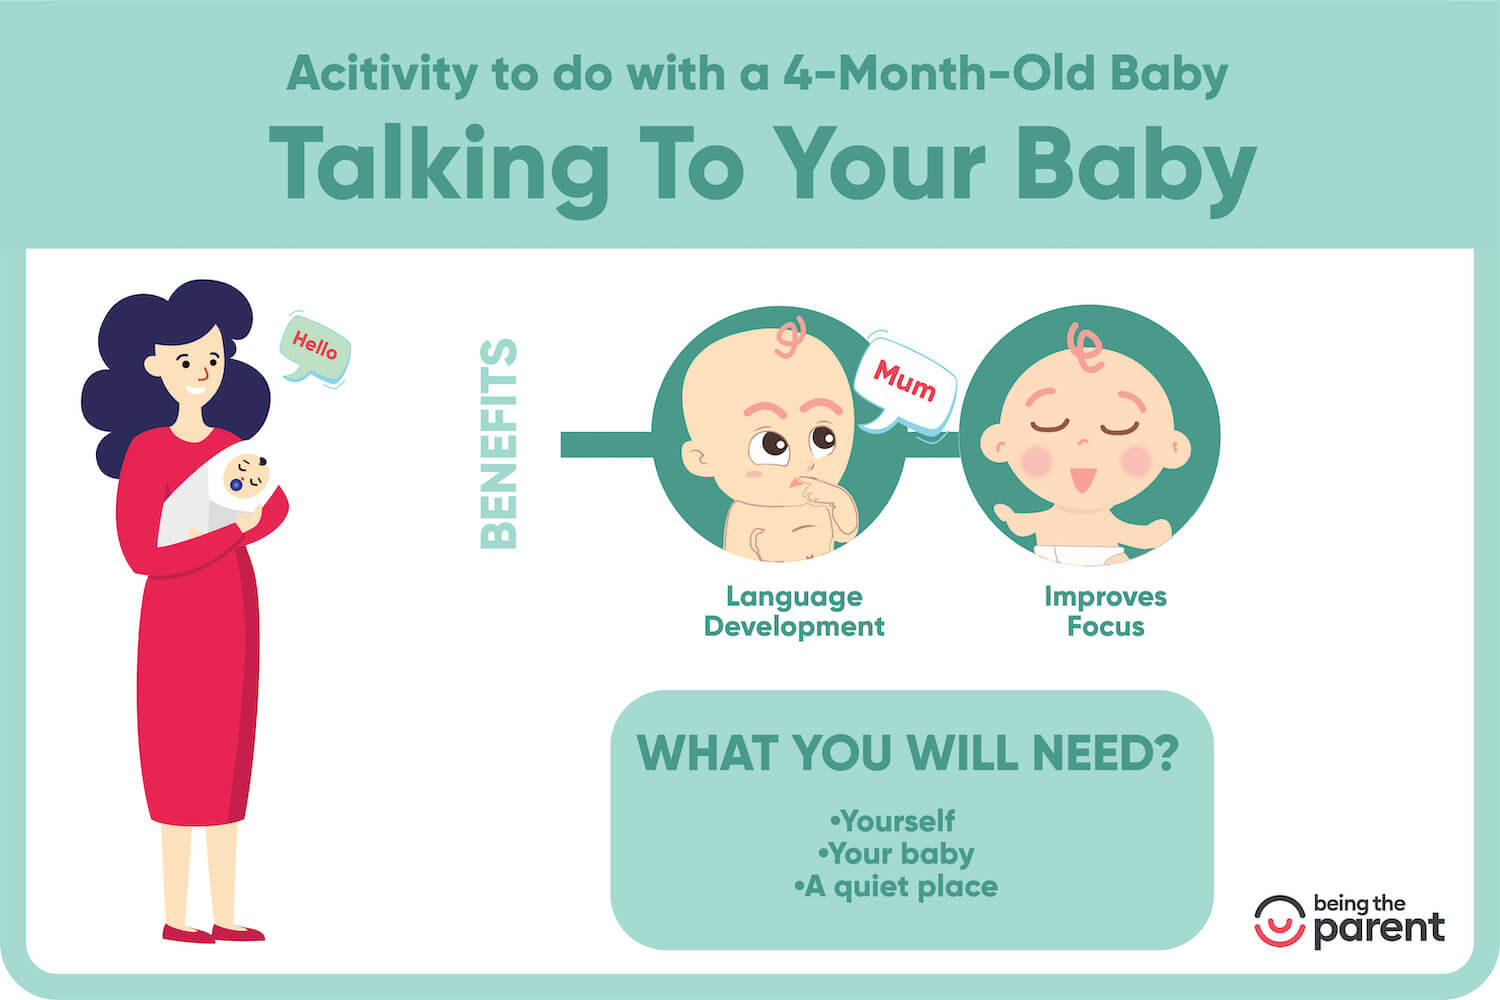 Consider Talking to Your Baby